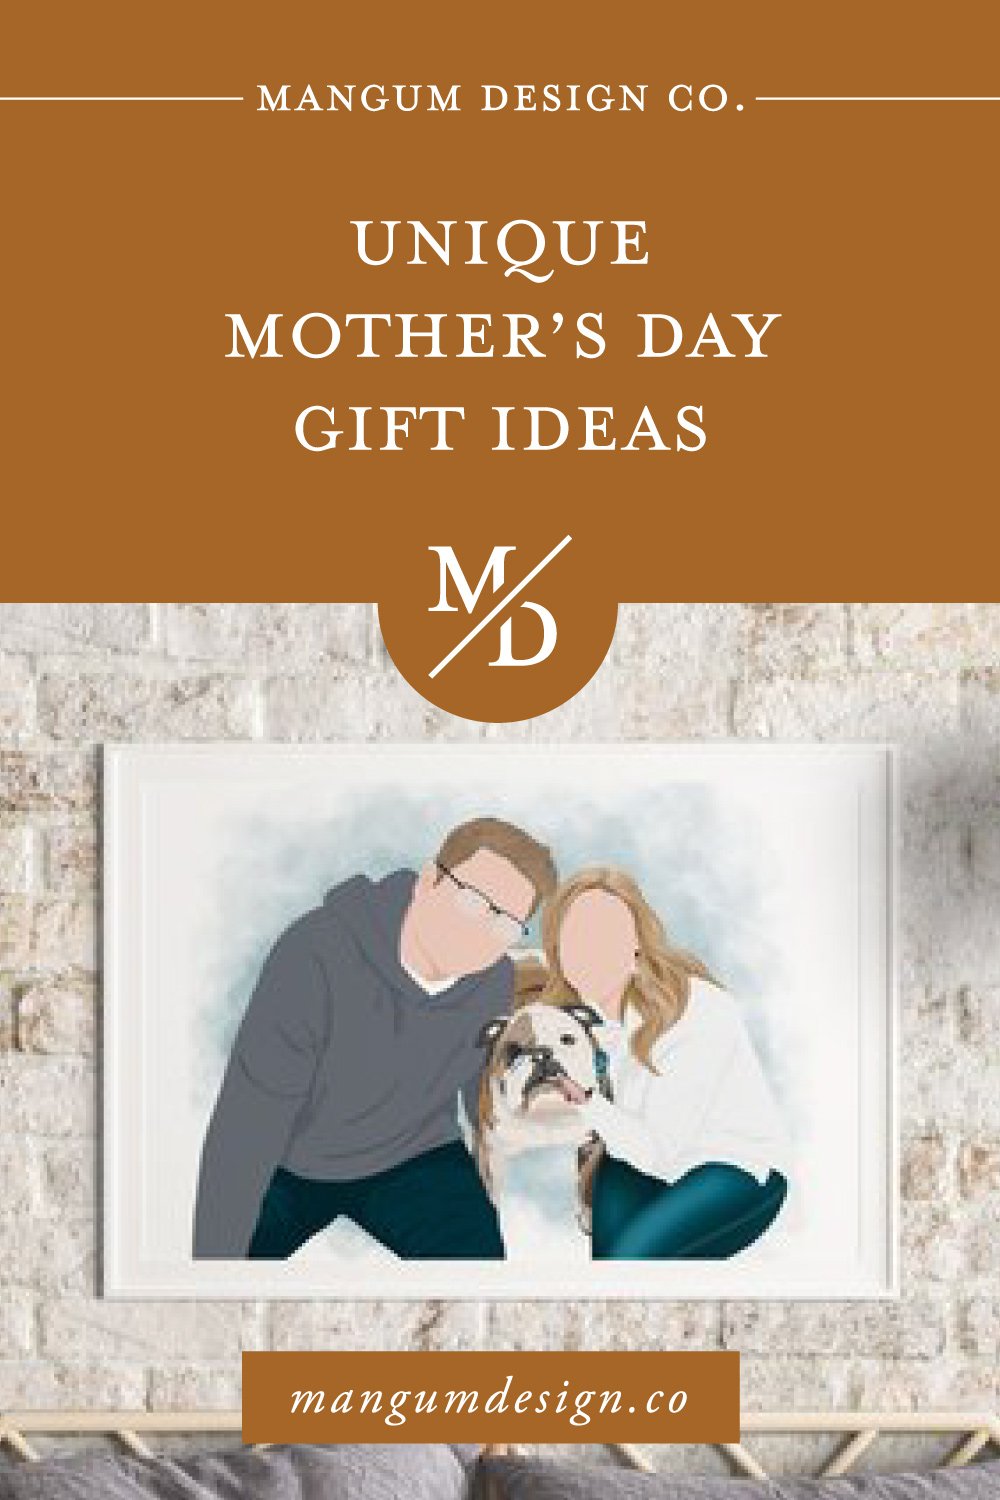  If you need a winning Mother’s Day gift idea, check out this gift guide from Mangum Design Co. #mangumdesignco #mothersdaygiftguide #mothersday #giftidea #sentimentalgifts #customgiftideas #customillustrations #personalizedjewelry 